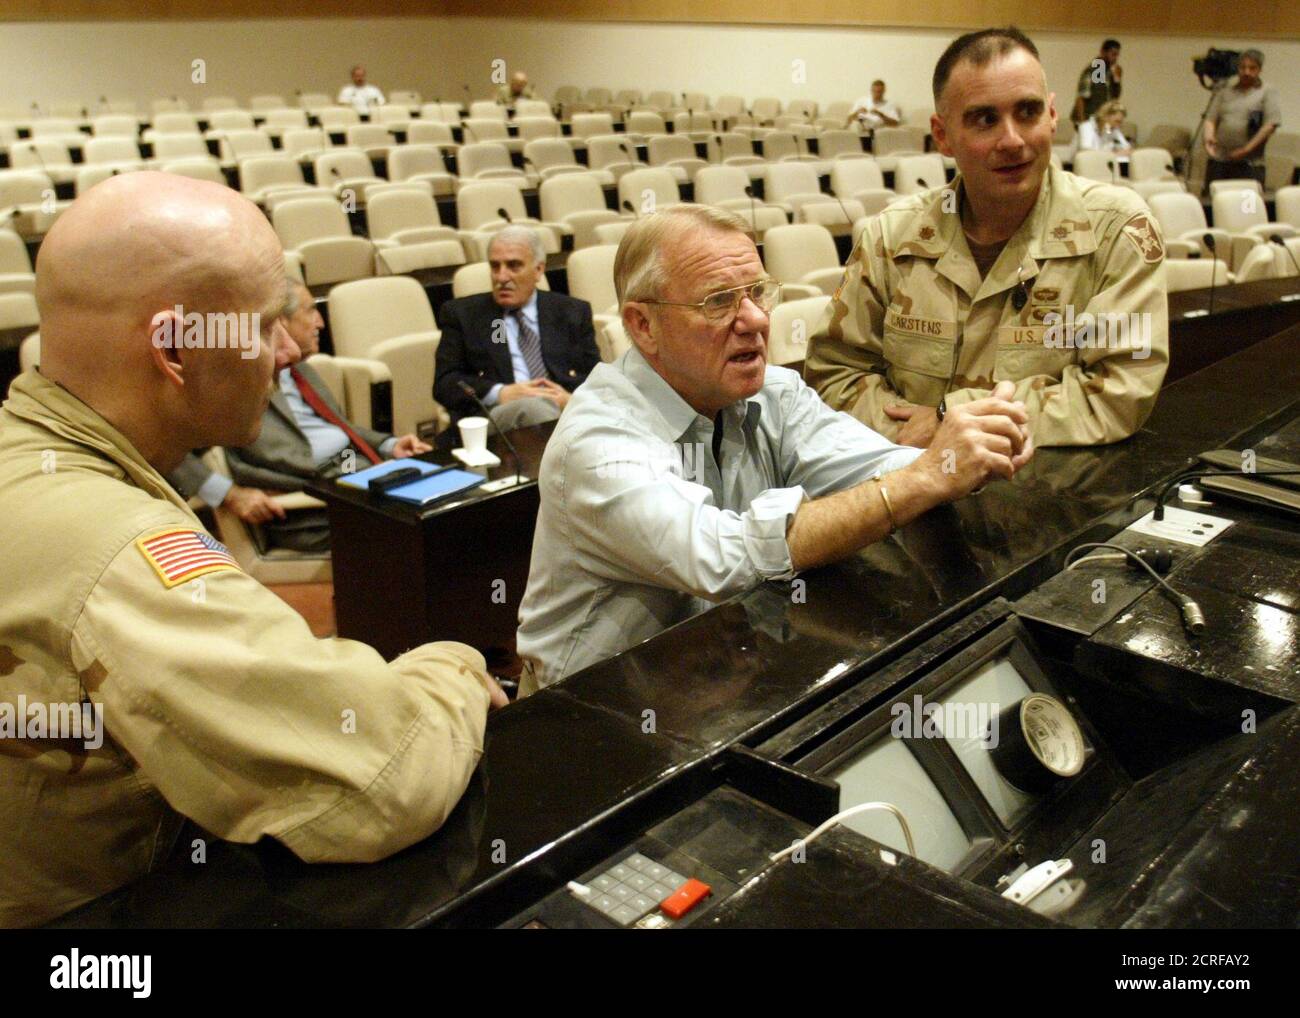 United States retired General Jay Garner (C), Iraq's civilian  administrator, studies a map of Bagdad with military personnel before a  meeting with nearly 100 Iraqis community leaders in Baghdad on April 29,